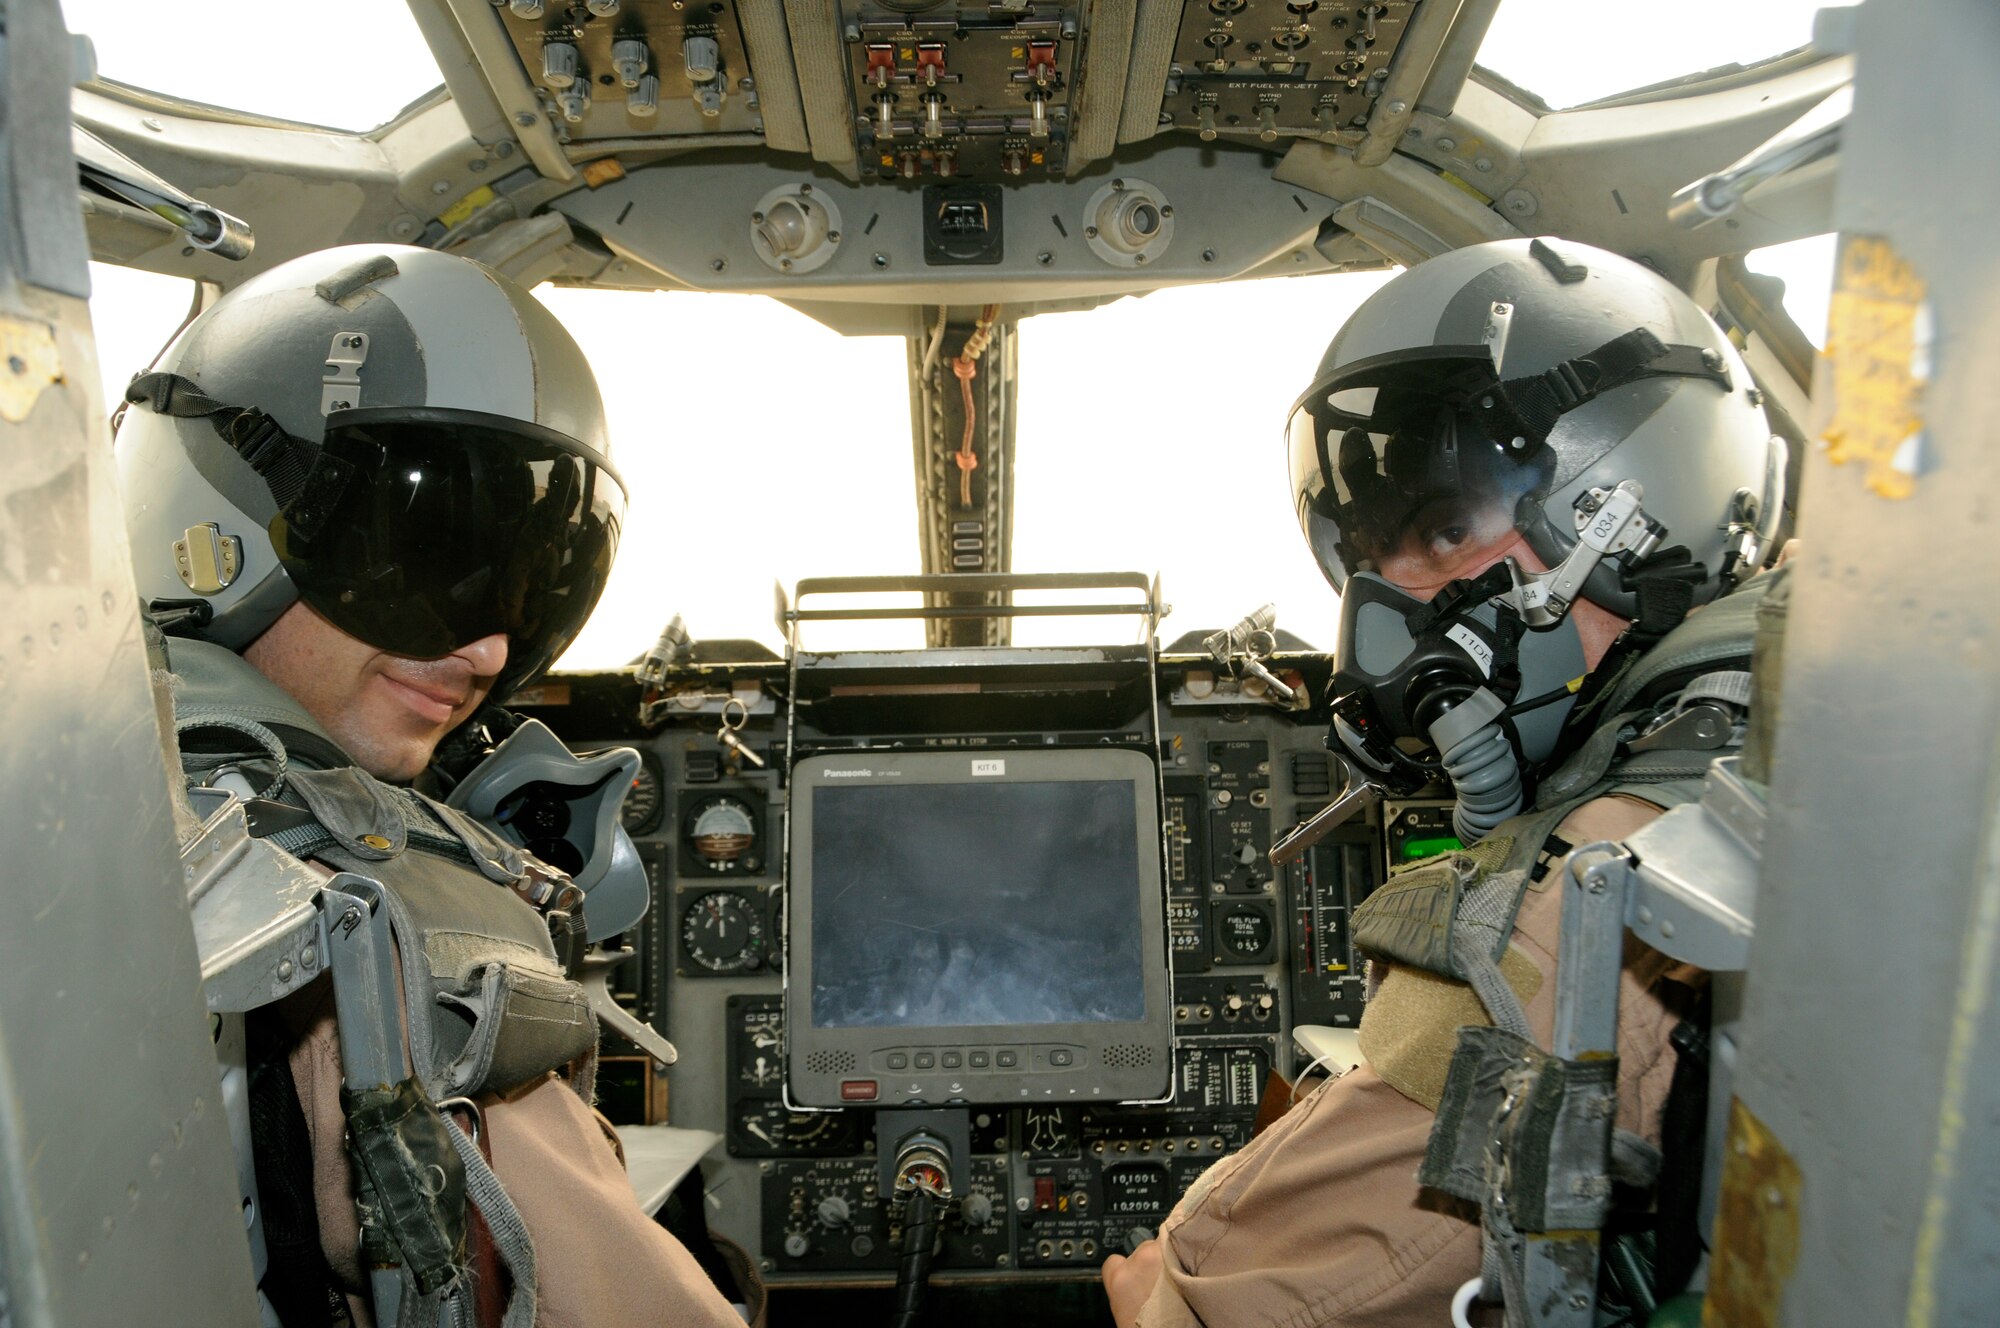 Maj. Jeff Cameron and Capt. Richard Hansen prepare for takeoff in support of Operation Enduring Freedom, at the 379th Air Expeditionary Wing in Southwest Asia, Nov. 19, 2013. Cameron is a B-1 pilot originally from Midland, Texas, and Hansen is a B-1 pilot originally from Lancaster, Calif., both are 9th Expeditionary Bomb Squadron pilots currently deployed from Dyess Air Force Base, Texas. (U.S. Air Force photo/Senior Airman Hannah Landeros)